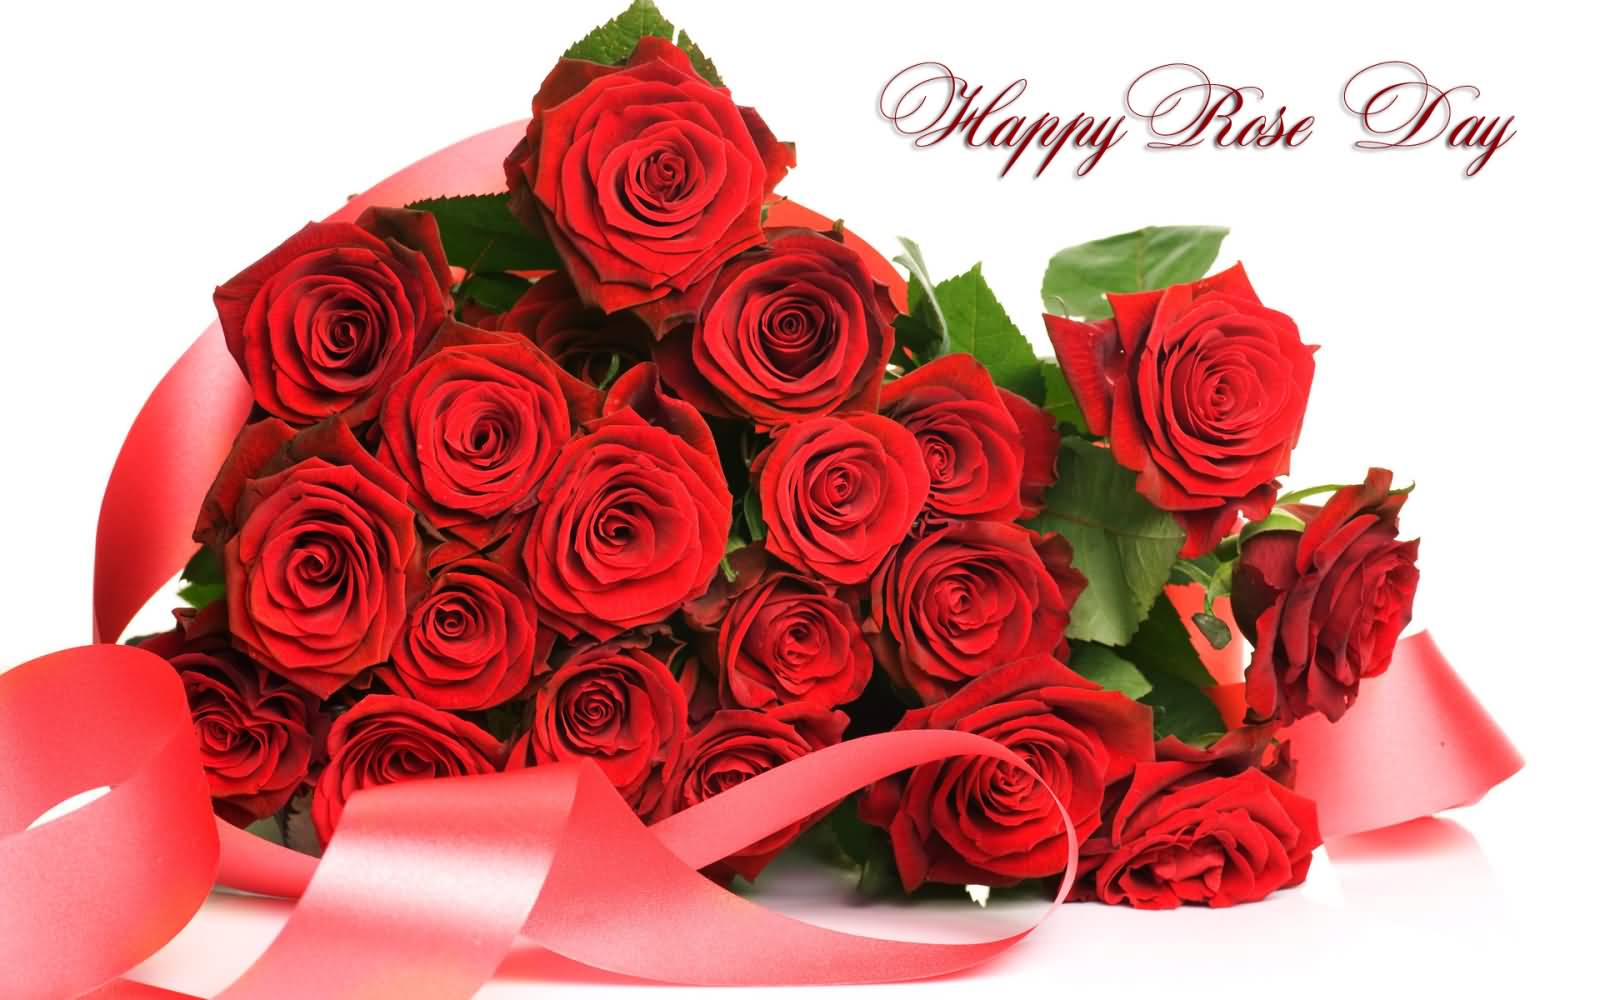 Happy Rose Day 2017 Rose Flowers Bouquet